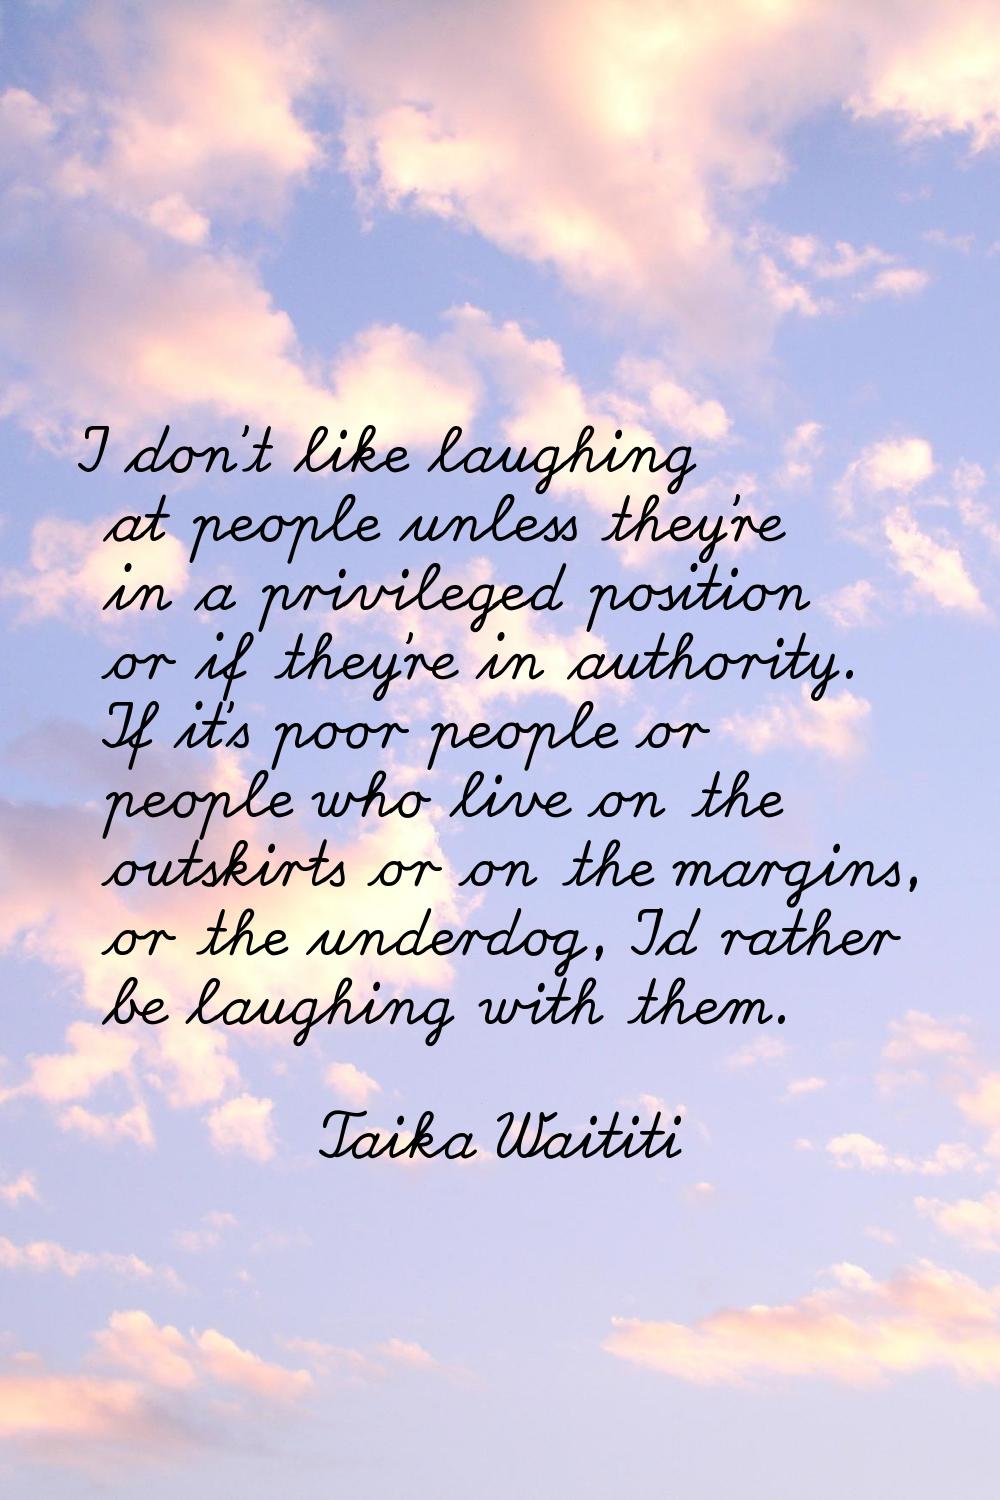 I don't like laughing at people unless they're in a privileged position or if they're in authority.